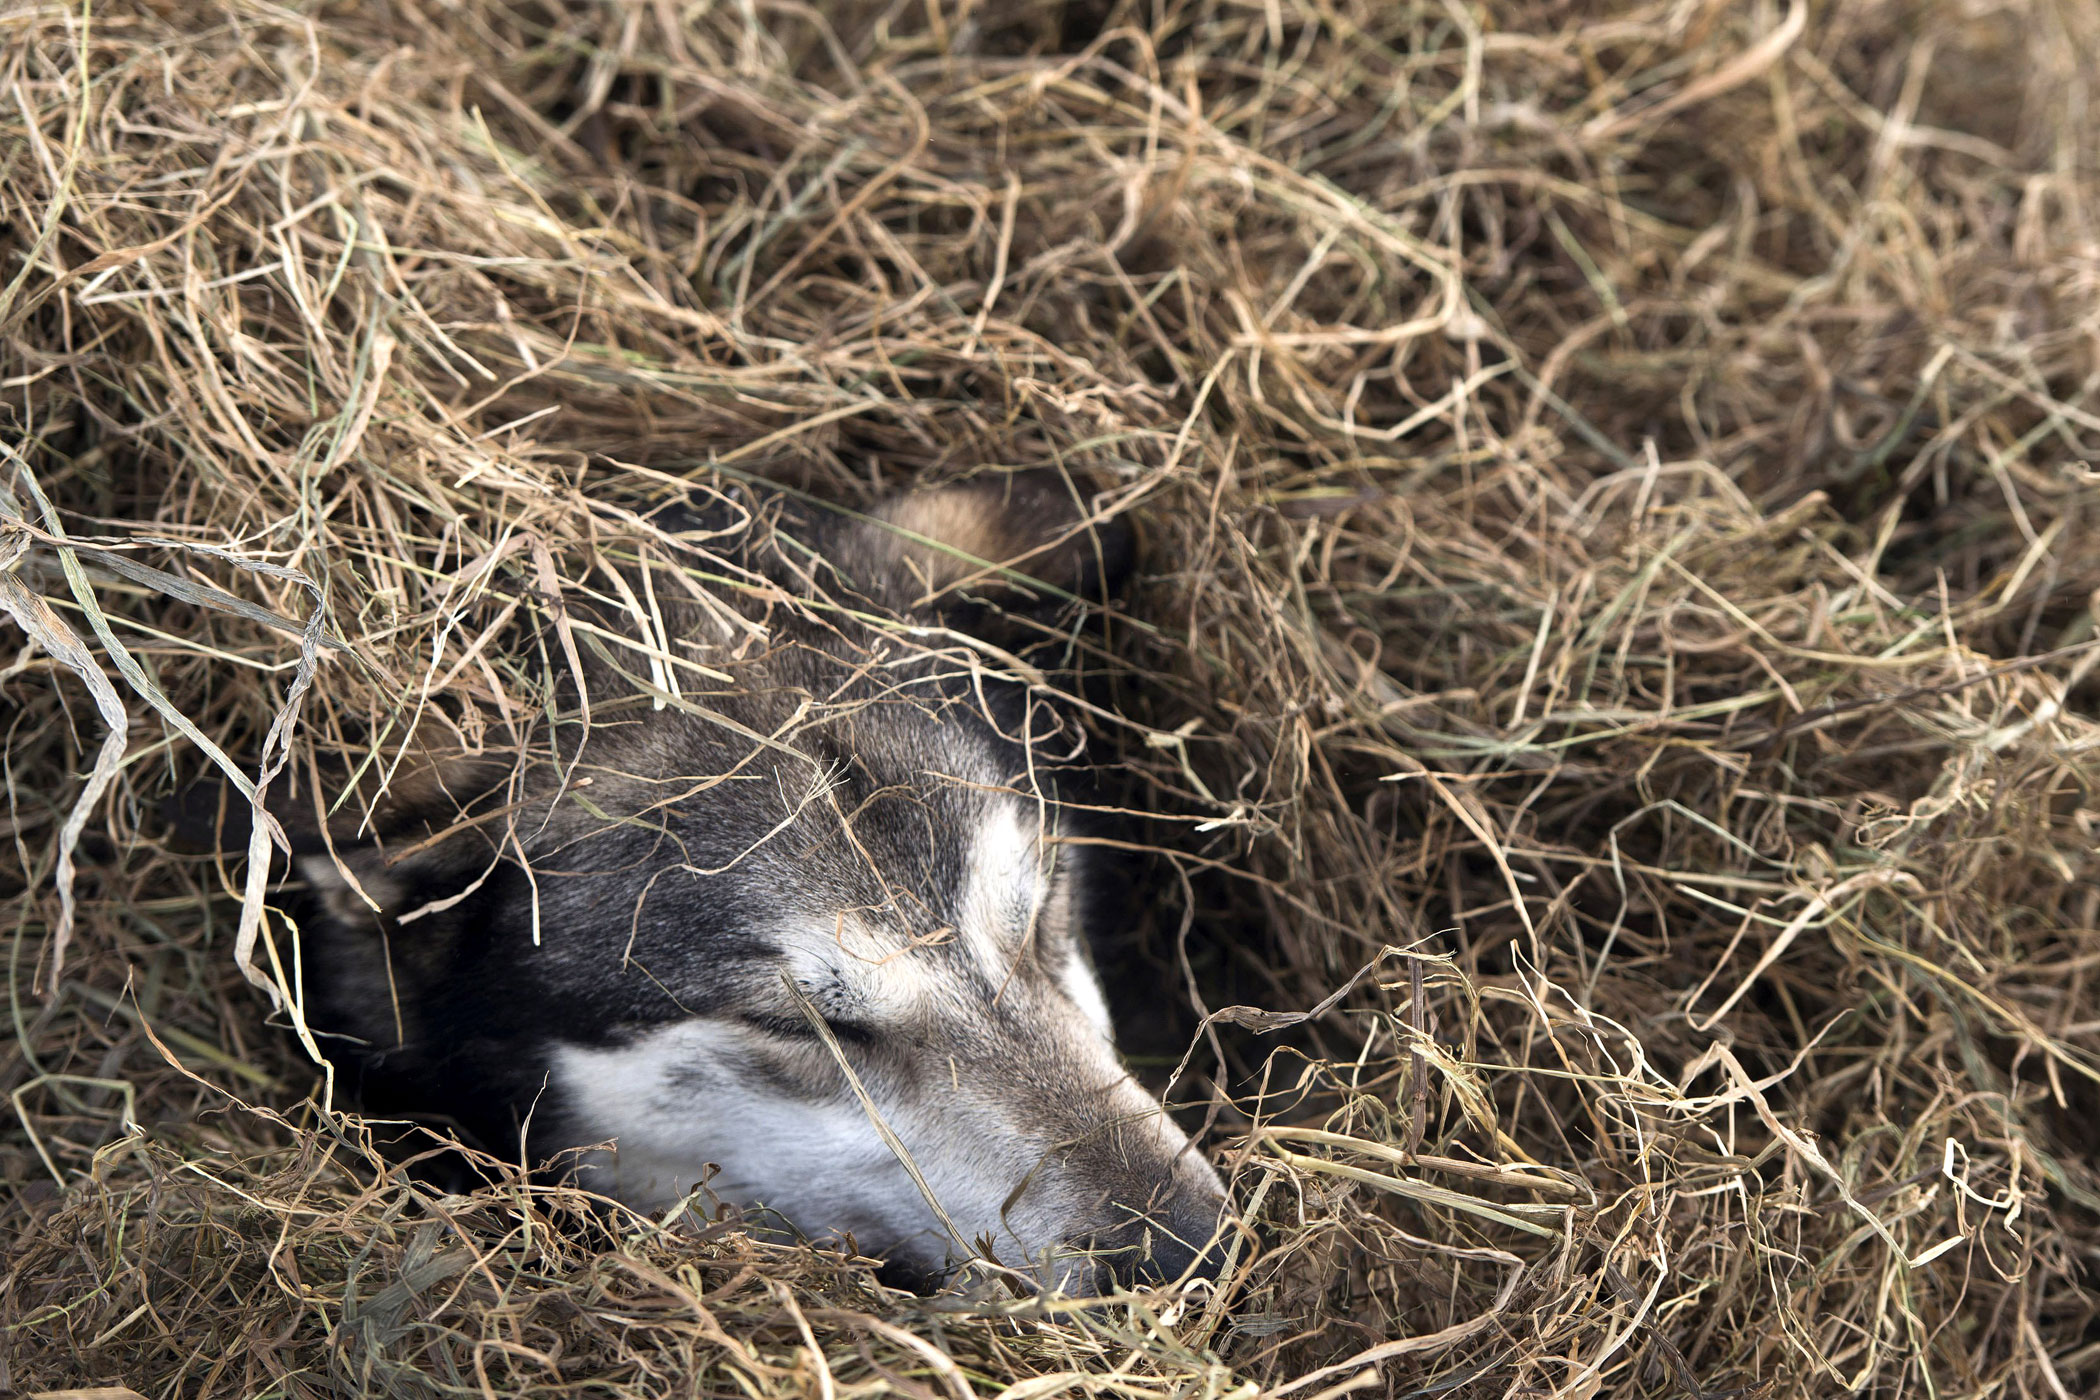 One of Nicolas Petit's dogs rests in straw on Puntilla Lake on March 7, in Rainy Pass, Alaska.